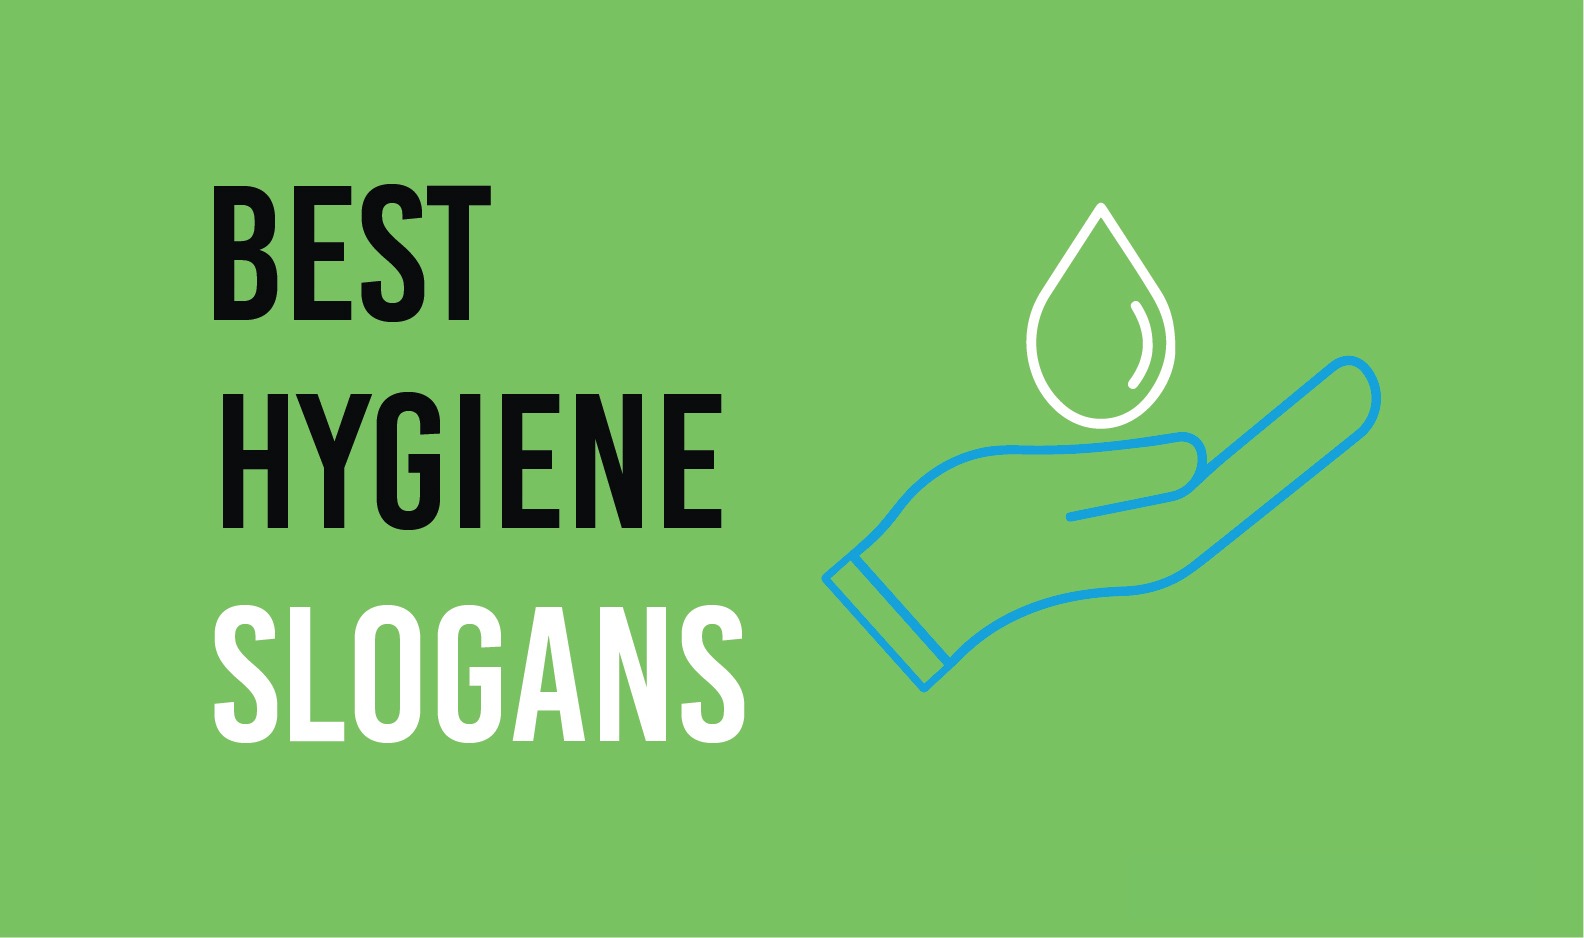 Hygiene Slogans and Sayings